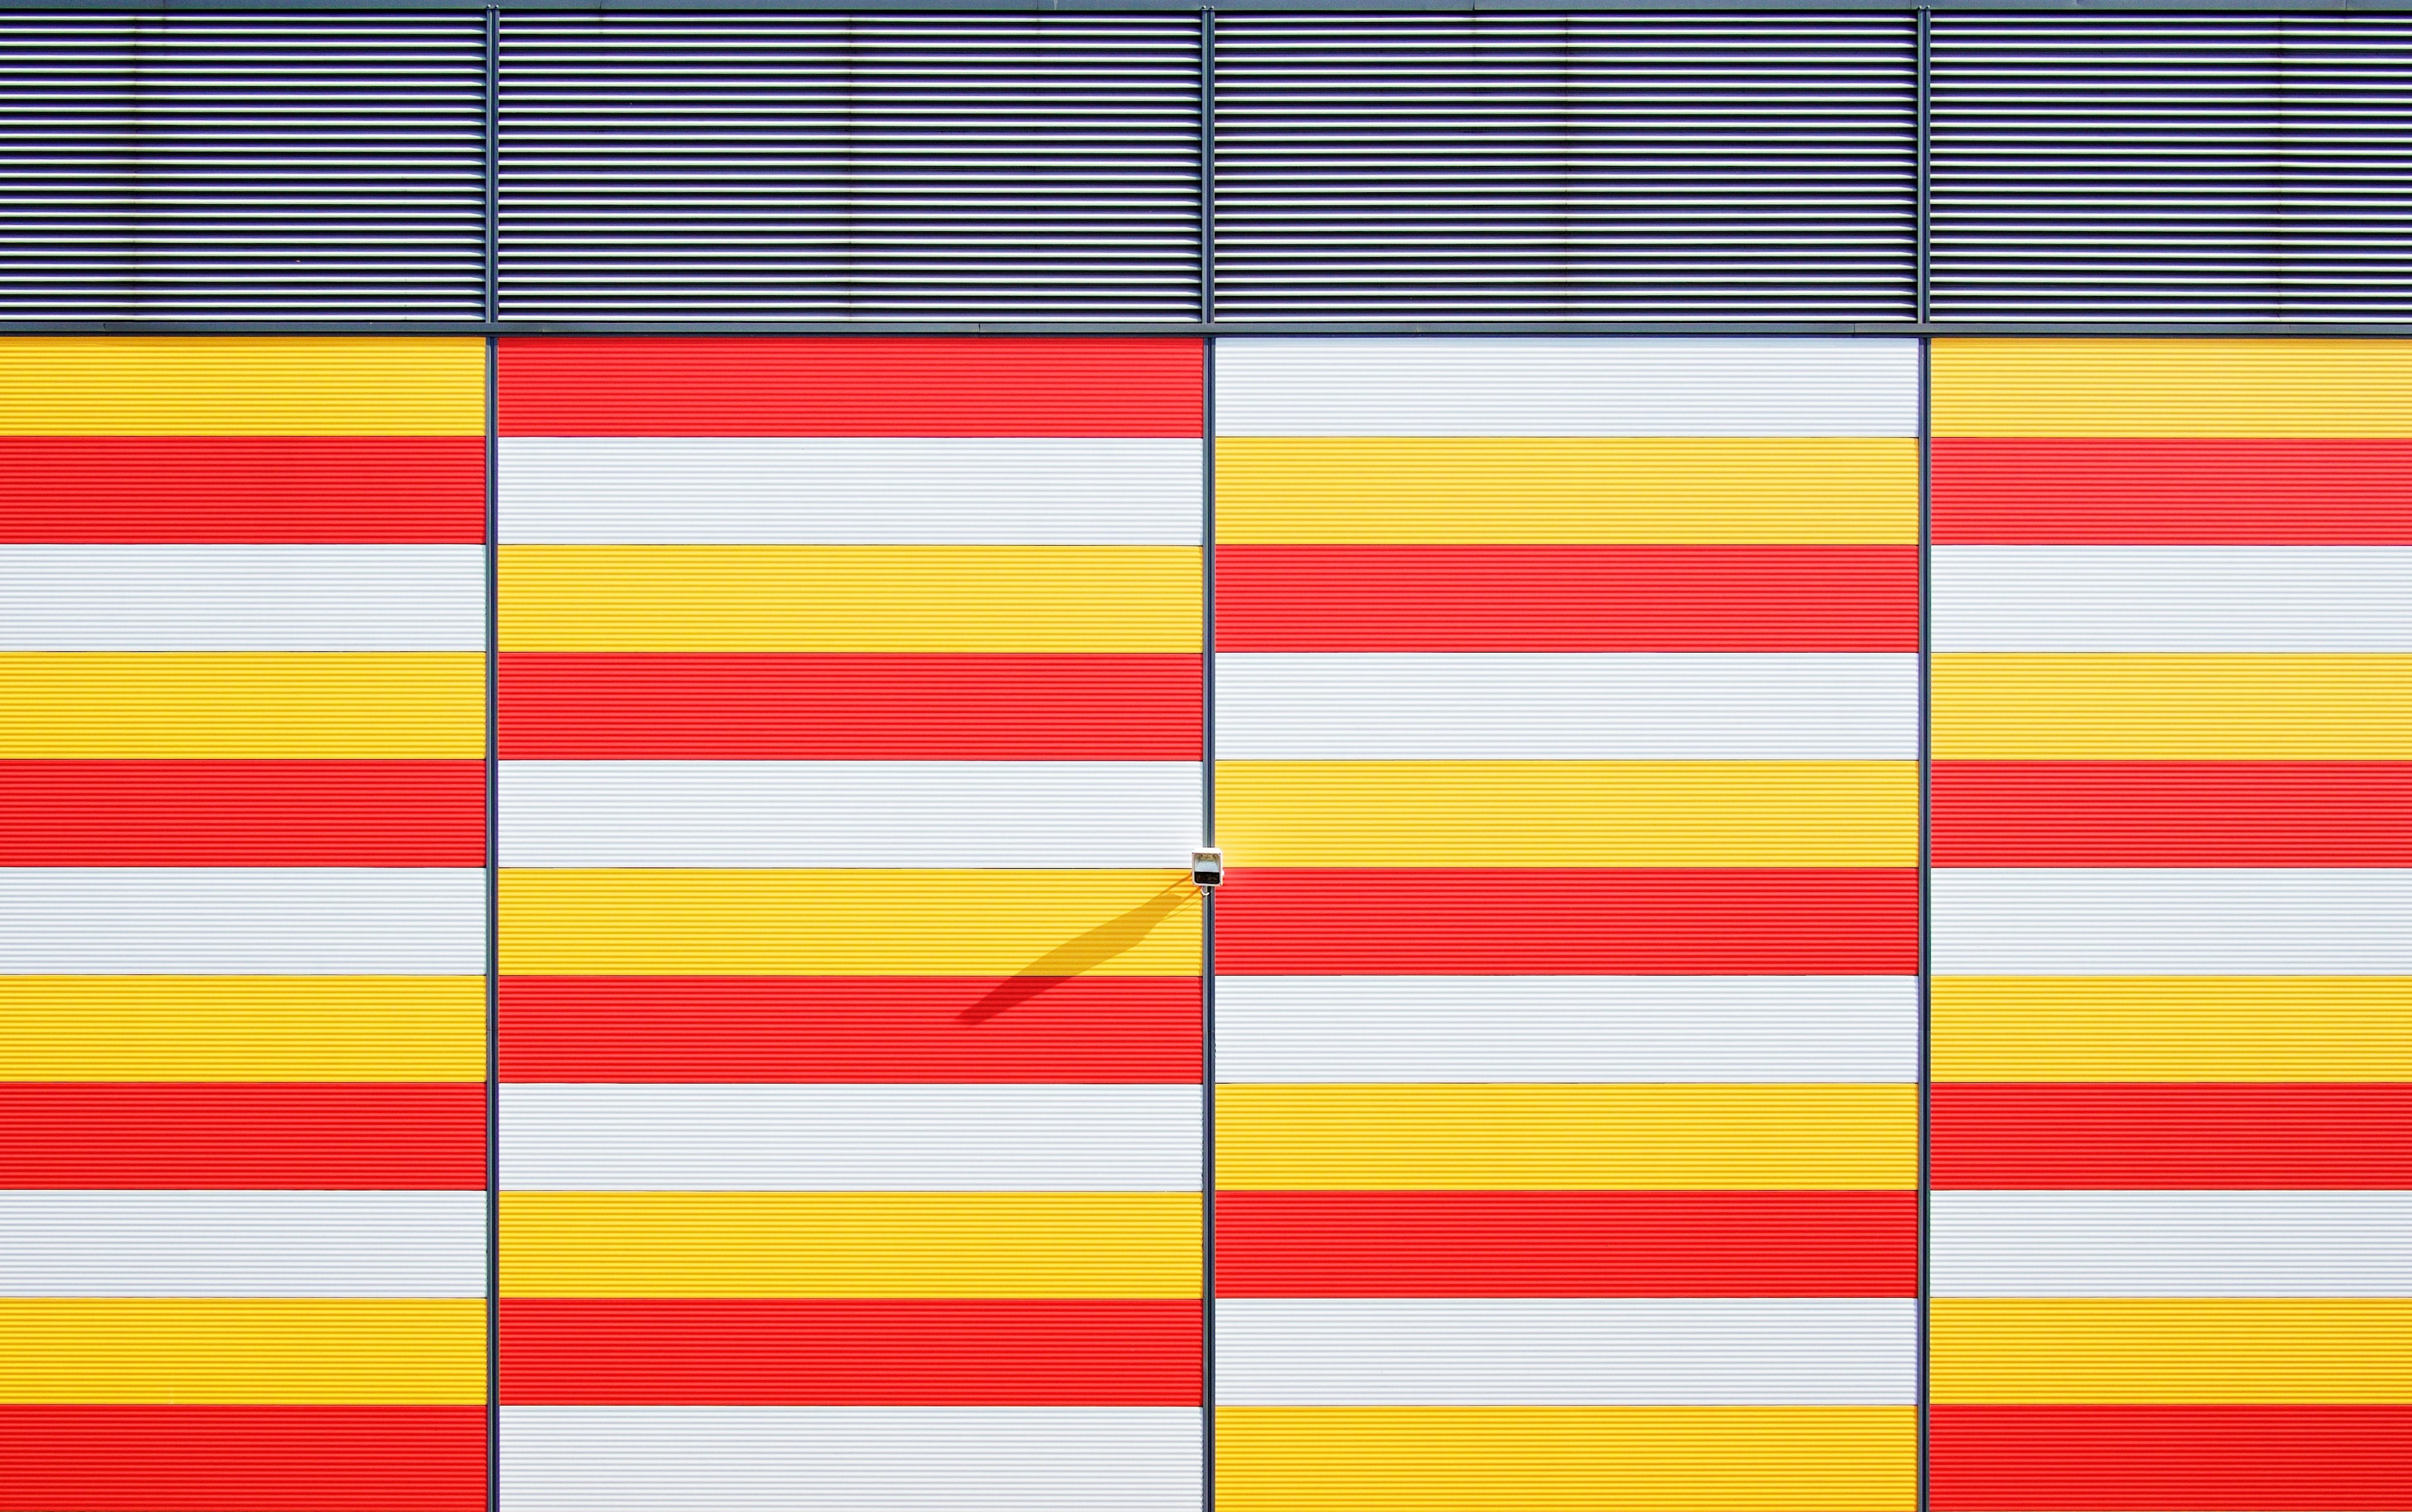 red, yellow, and white bars arranged in a pattern